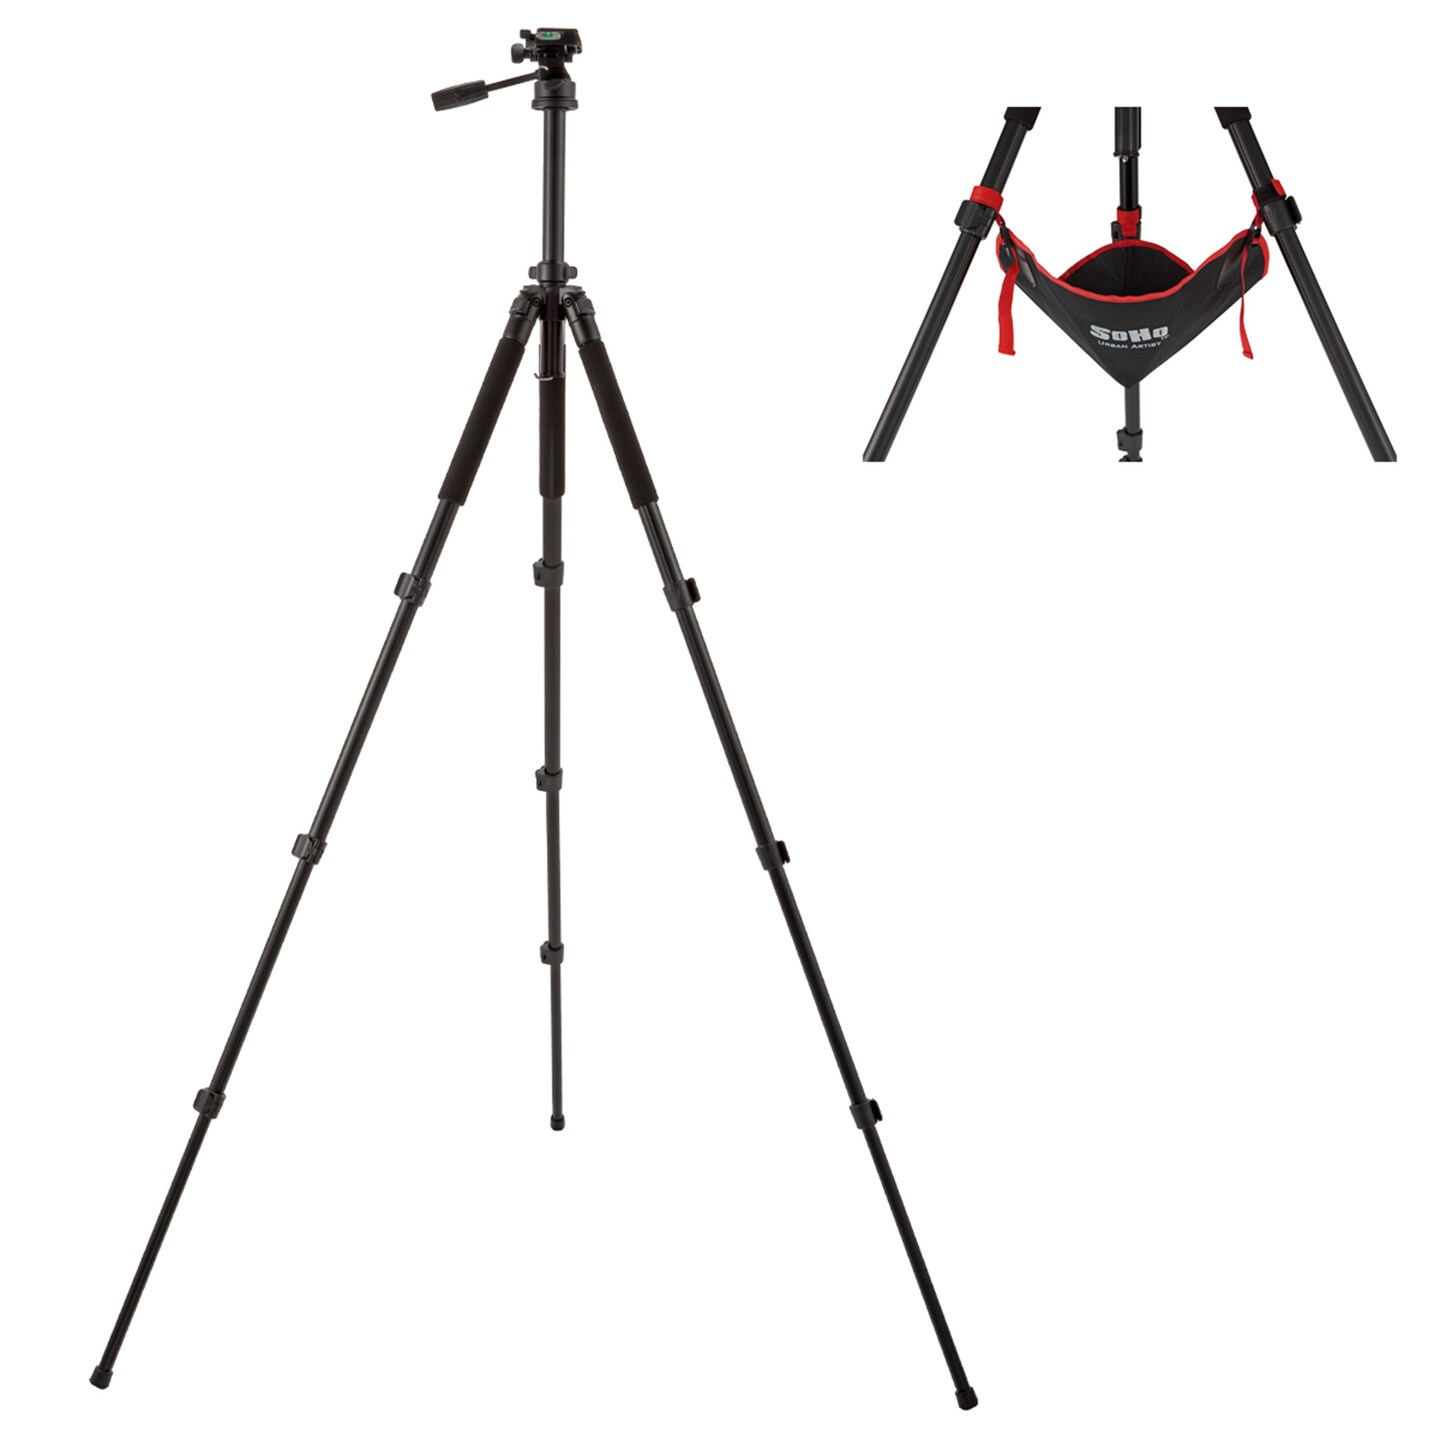 SoHo Urban Artist Deluxe Durable Aluminum Camera Tripod w/ Tripod Weight Bag, 3-Way Tilting Head, Telescoping Legs, Quick Release Plate, Adjusts 24.5-58in, Bubble Level, Compass, &#x26; Nylon Carrying Case